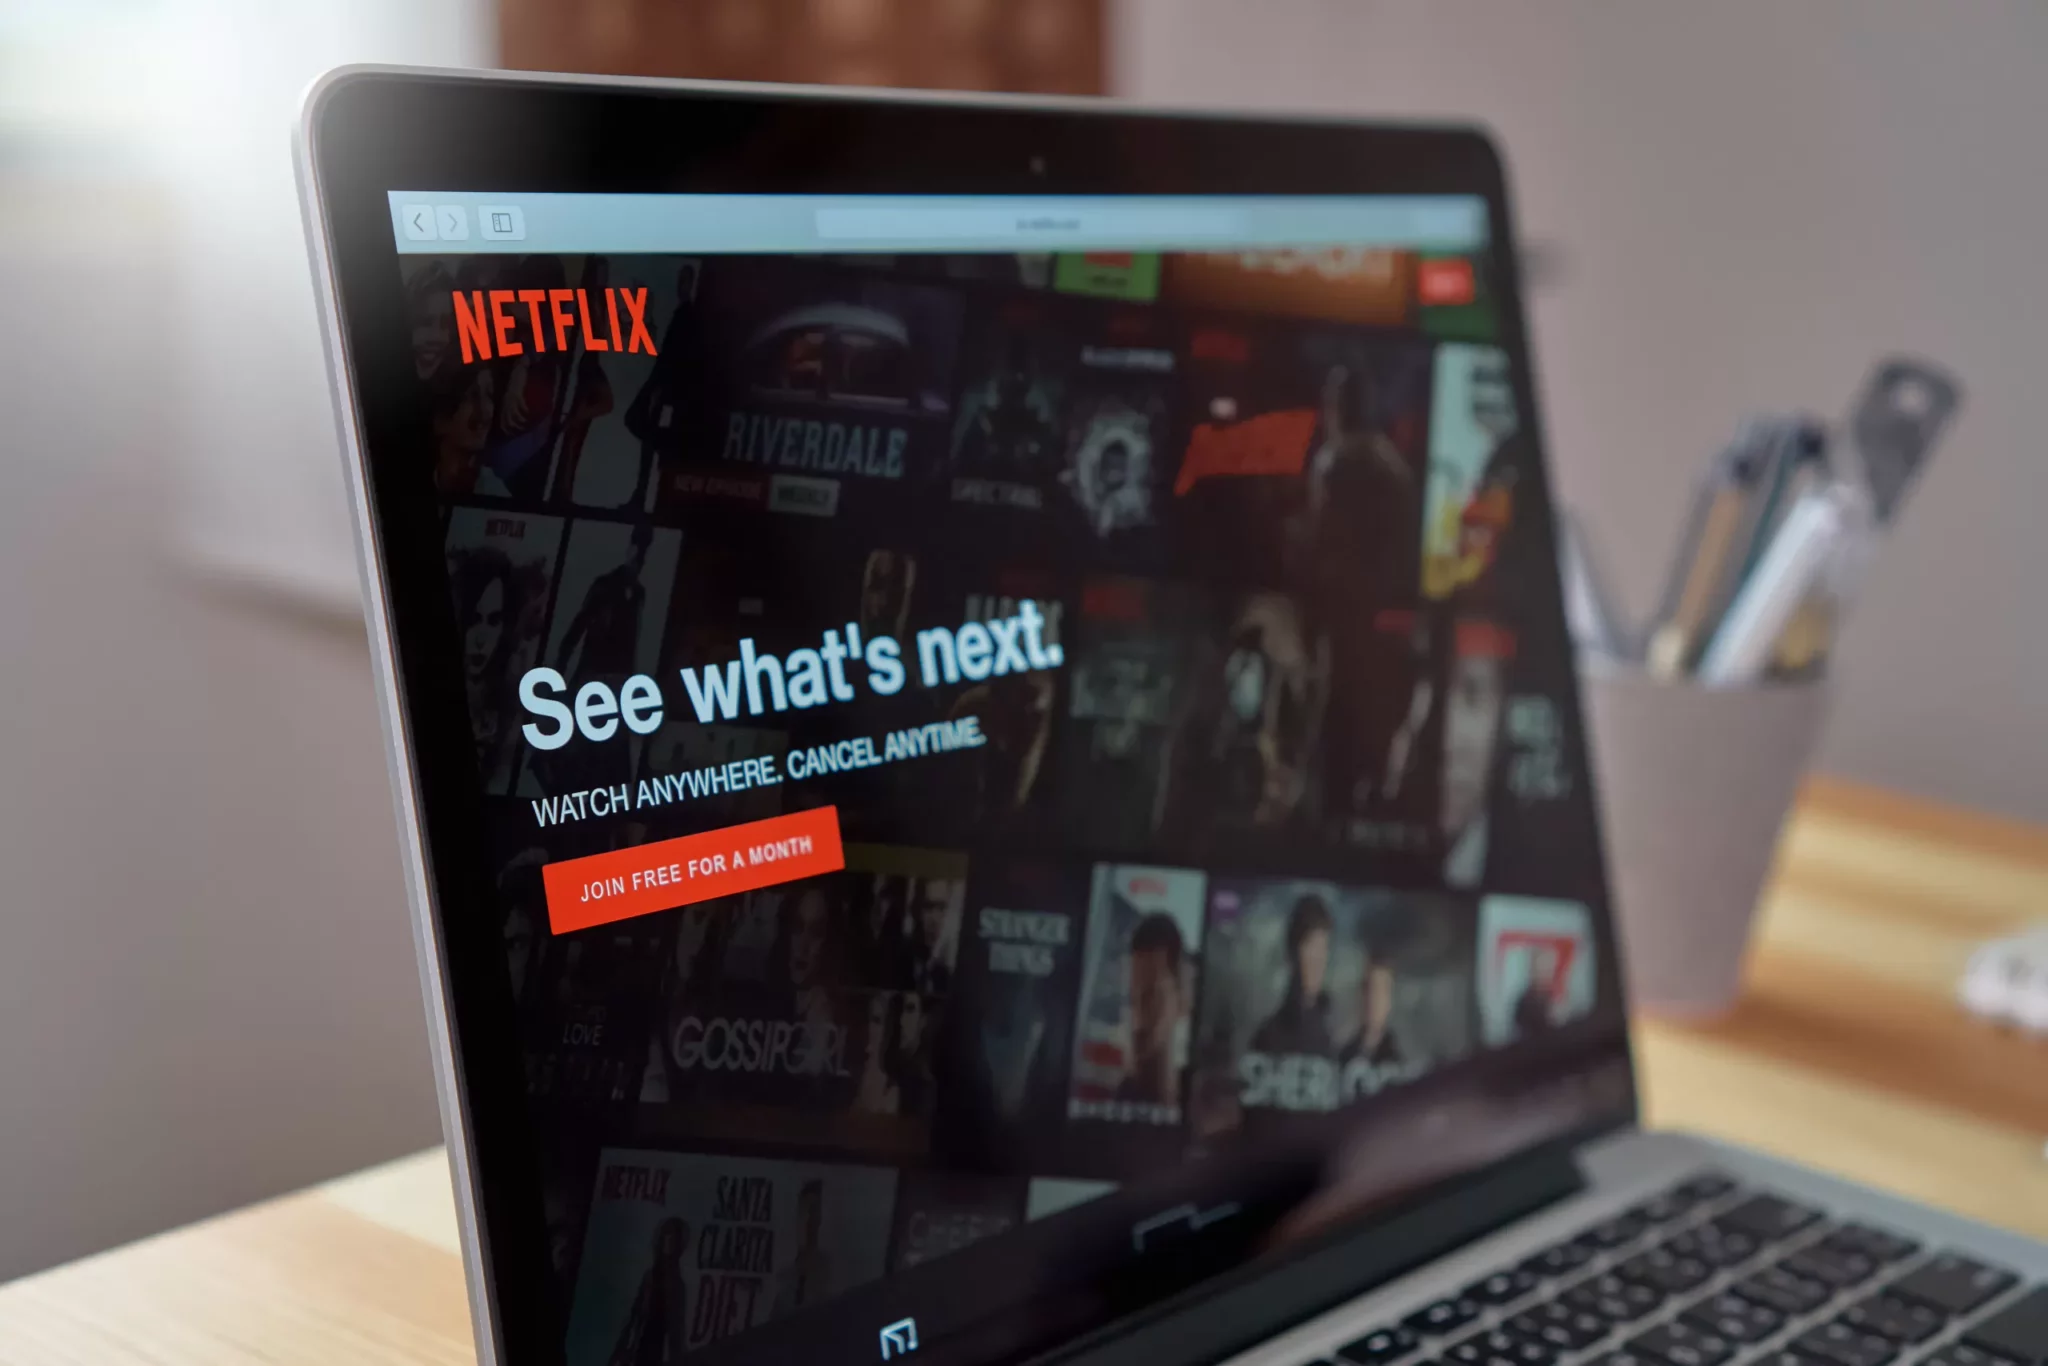 Netflix.com/activate: A Simple How to Guide